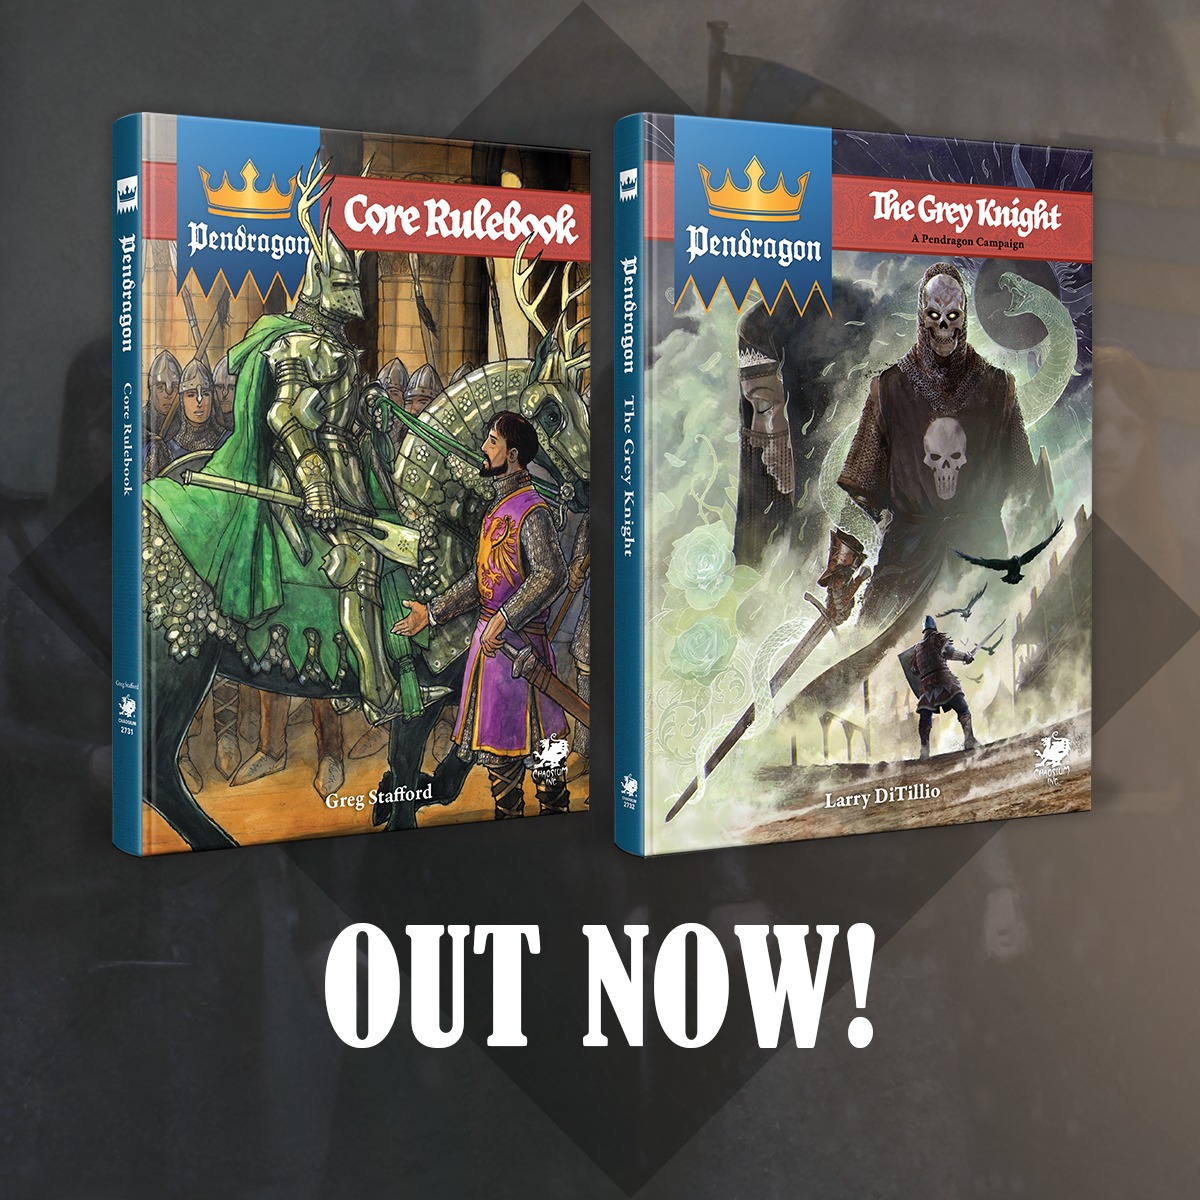 [Chaosium] Out now - Pendragon Core Rulebook and The Grey Knight